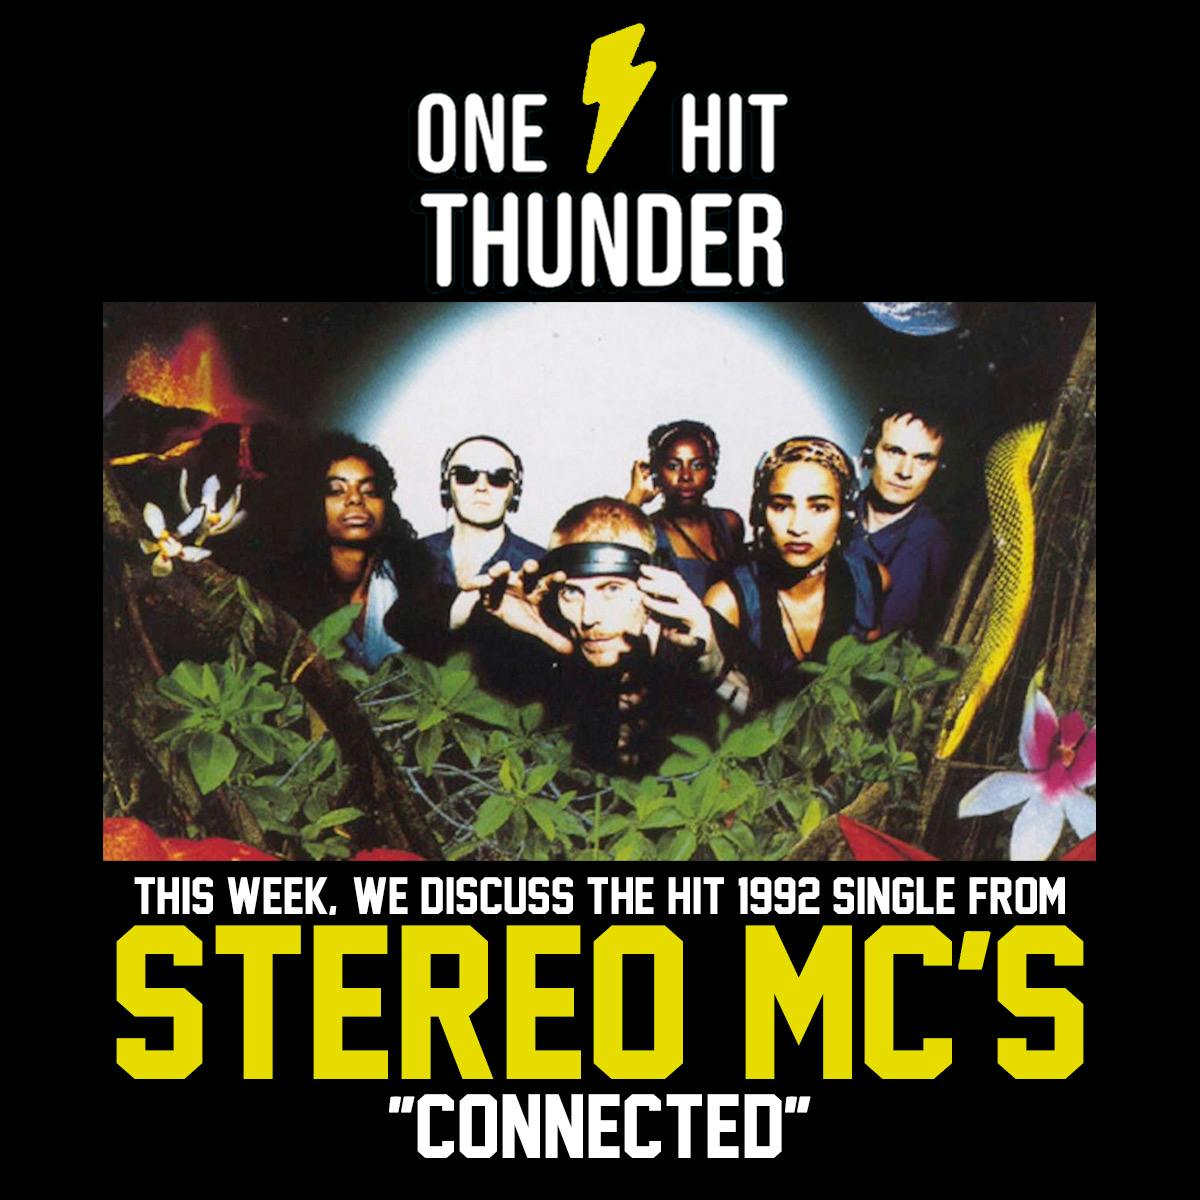 ”Connected” by Stereo MCs